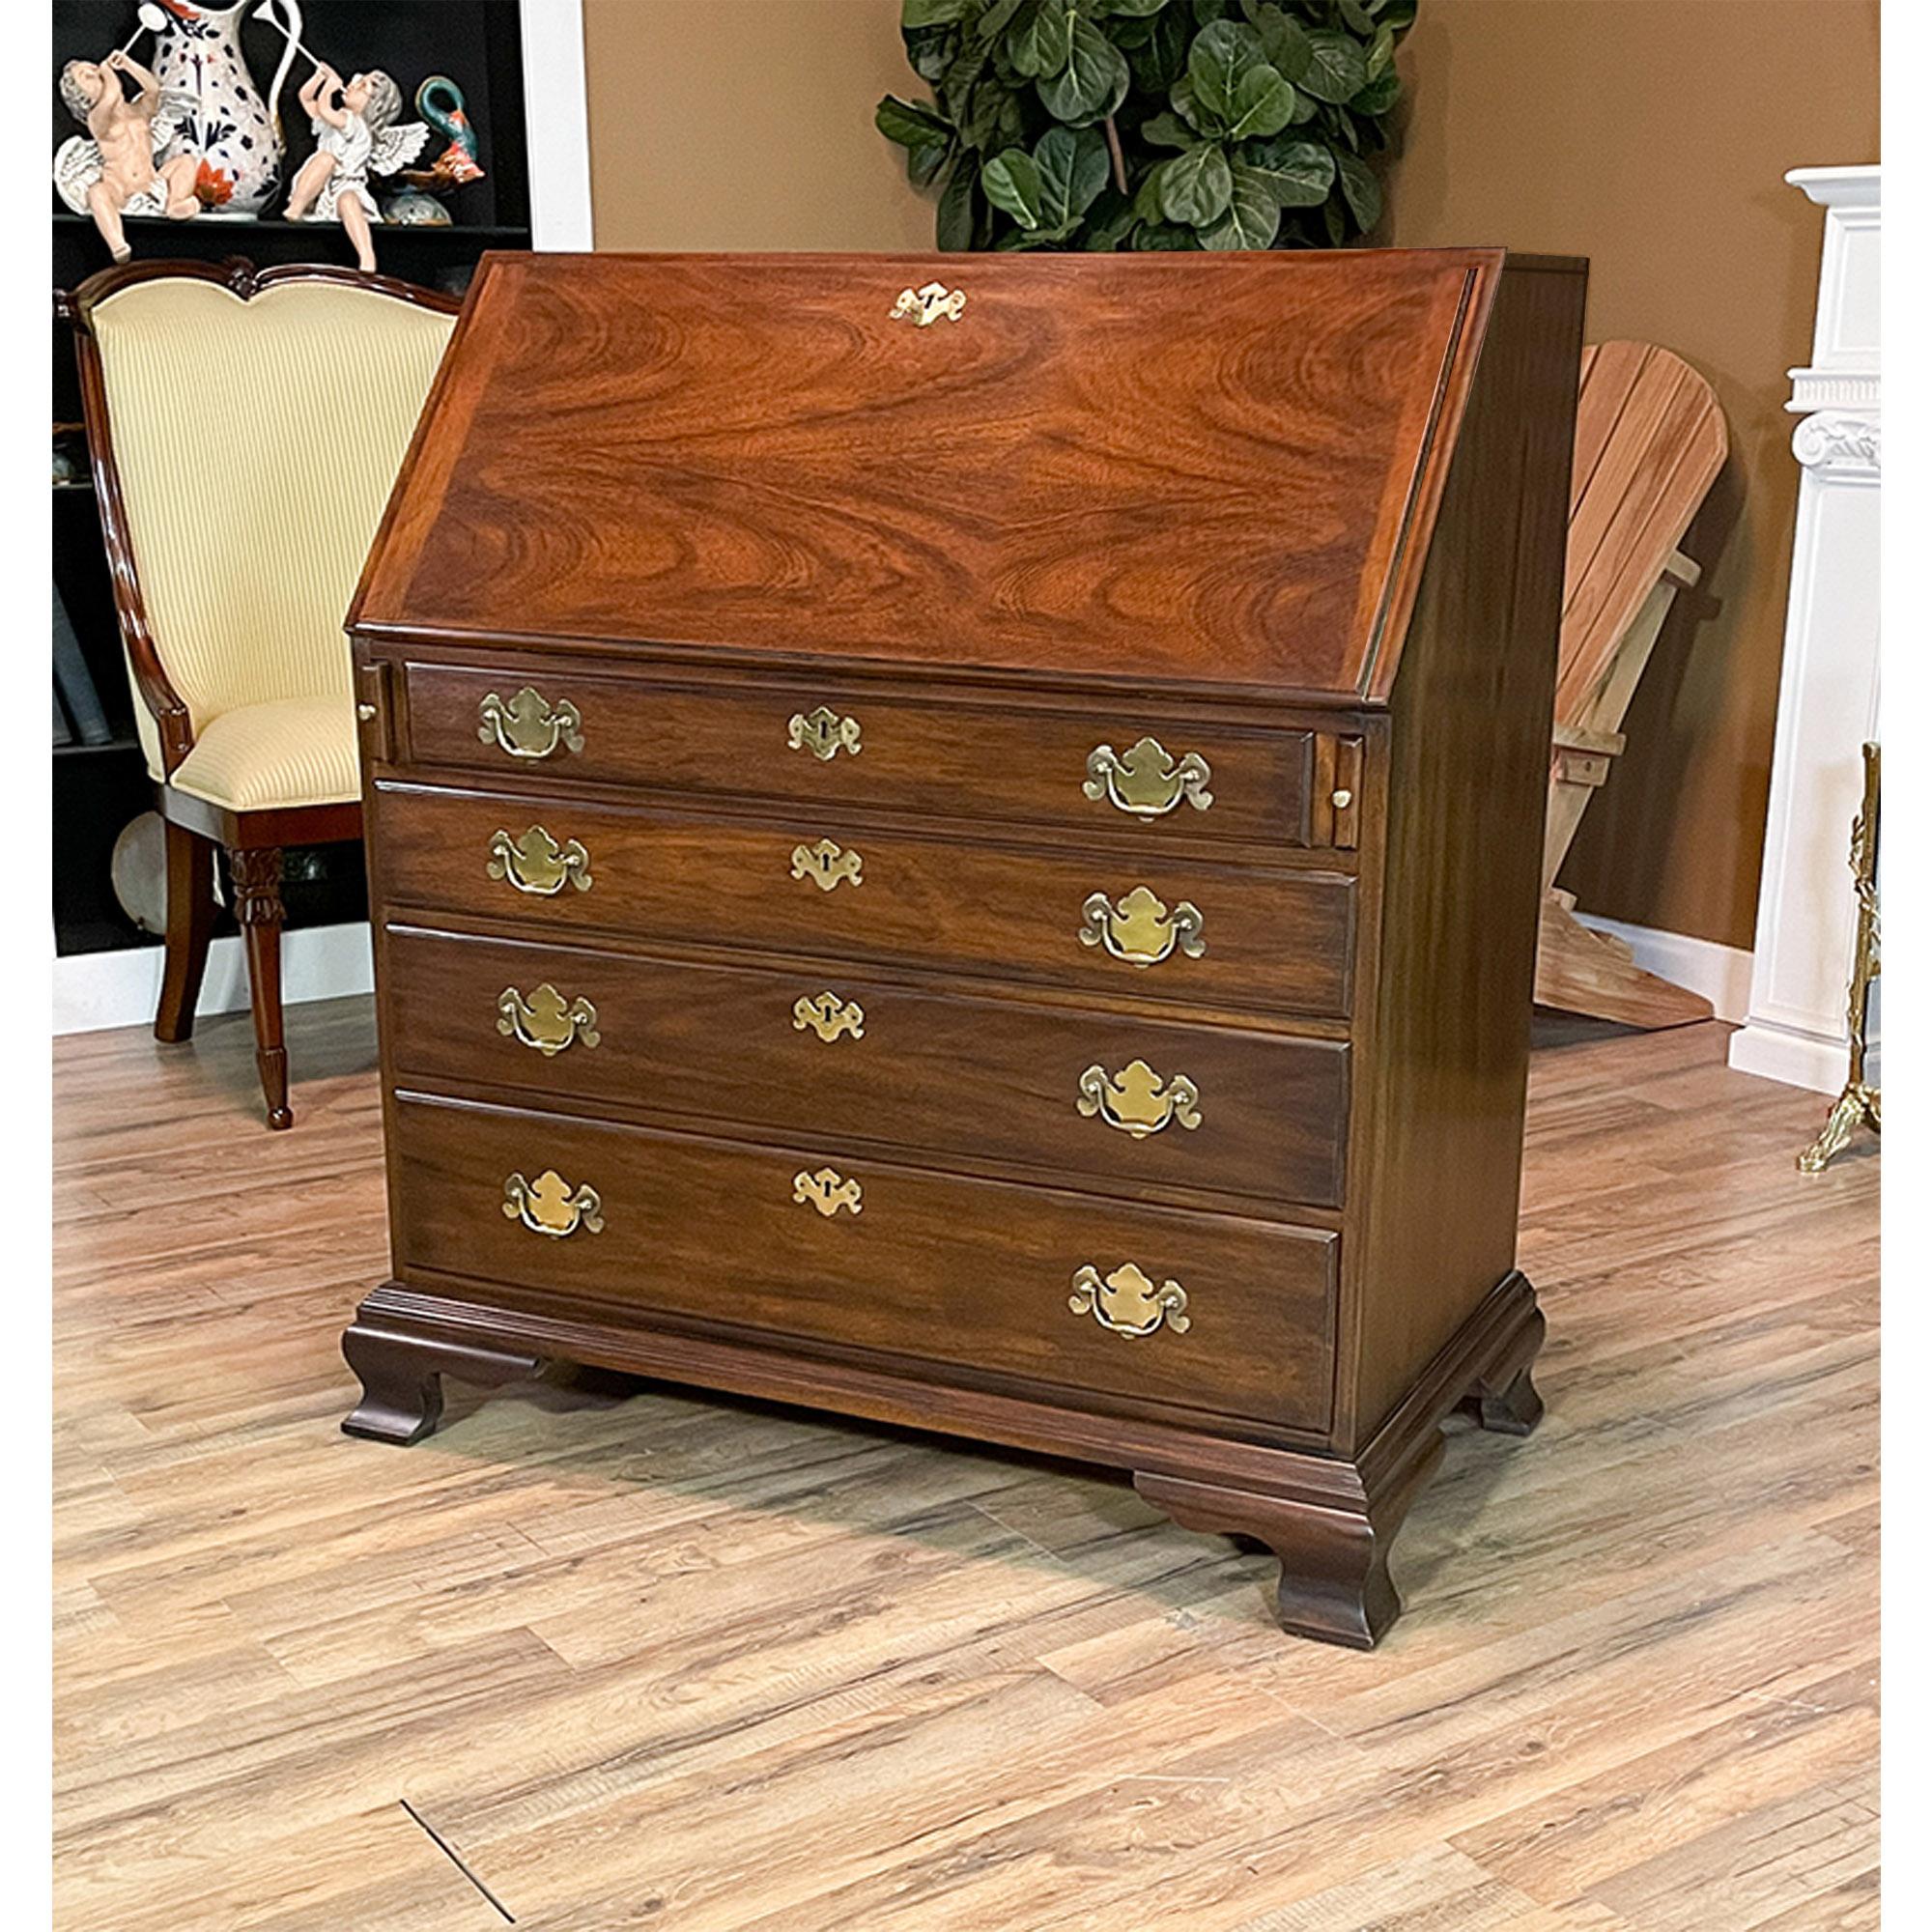 A Vintage Henkel Harris Secretary Desk. This desk is impressive in both it’s design and scale. Made of beautifully grained solid mahogany, the bookcase features a wide range of shelves and storage areas in the interior of the cabinet. The top